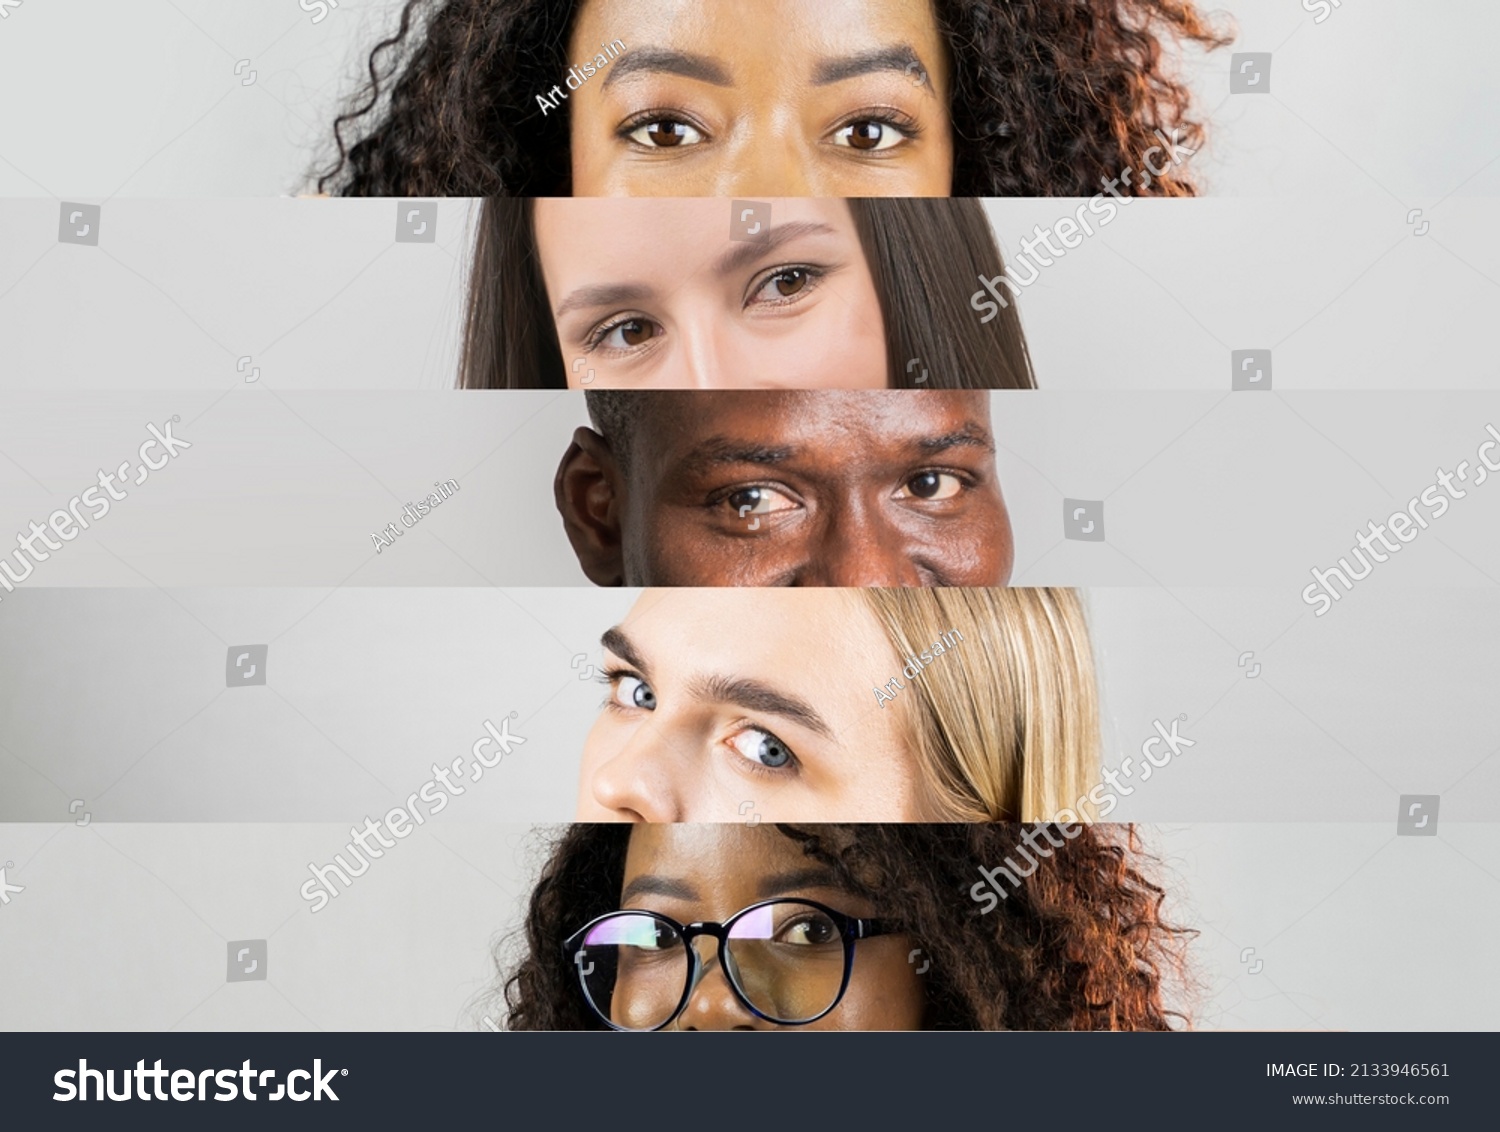 Collage of close-up male and female eyes on colored backgorund. Multicolored stripes. Concept of equality, unification of all nations, ages and interests #2133946561